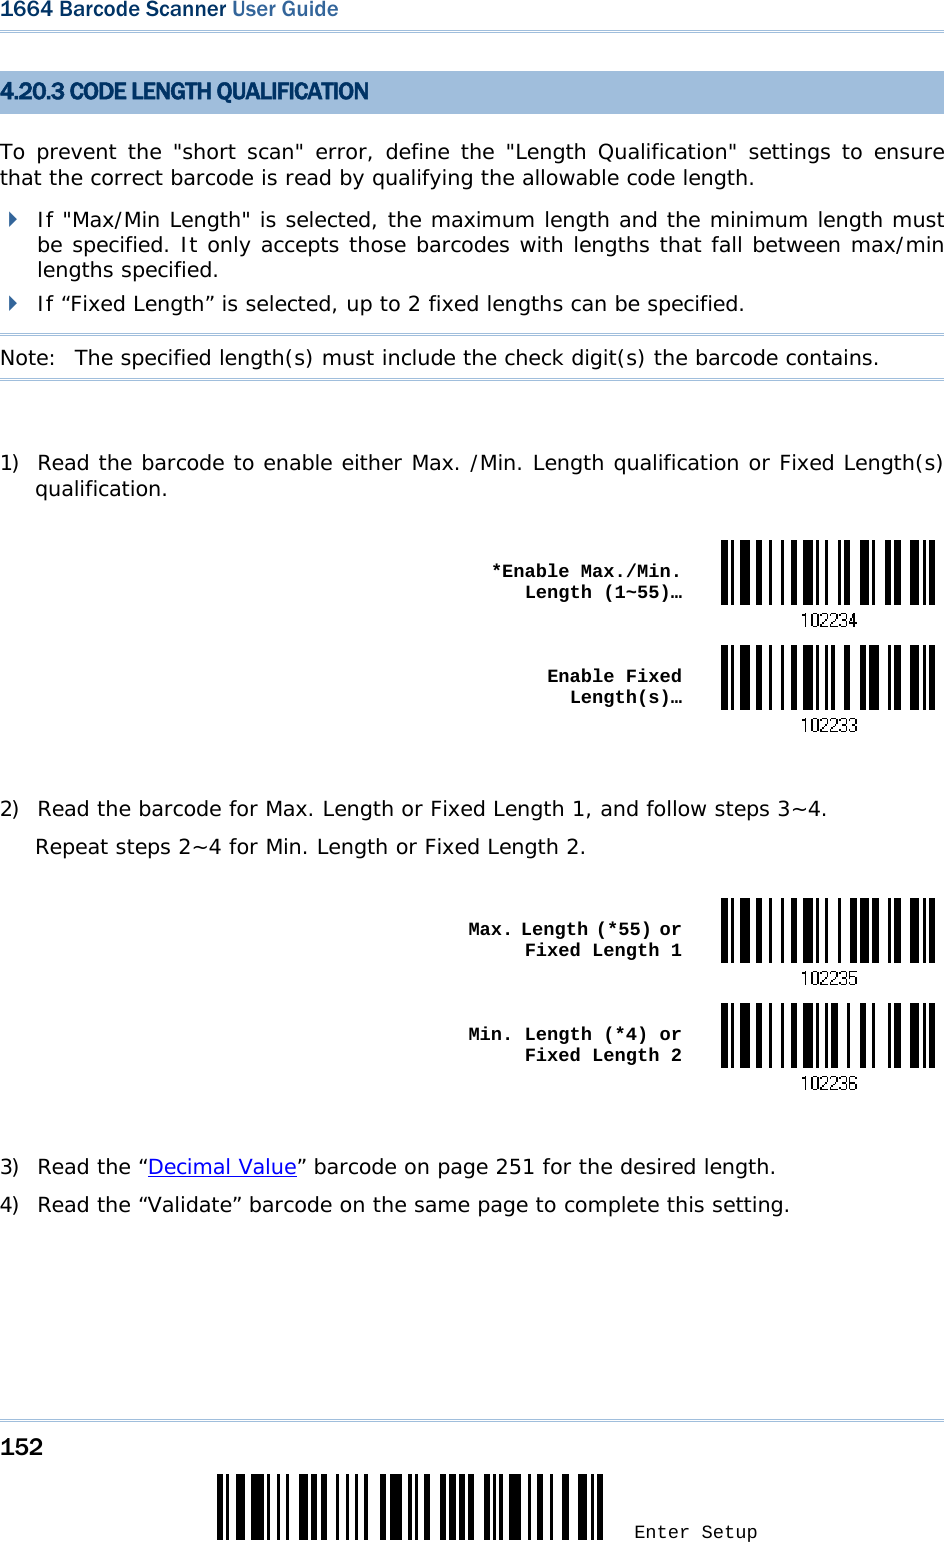 152 Enter Setup 1664 Barcode Scanner User Guide  4.20.3 CODE LENGTH QUALIFICATION To prevent the &quot;short scan&quot; error, define the &quot;Length Qualification&quot; settings to ensure that the correct barcode is read by qualifying the allowable code length.   If &quot;Max/Min Length&quot; is selected, the maximum length and the minimum length must be specified. It only accepts those barcodes with lengths that fall between max/min lengths specified.  If “Fixed Length” is selected, up to 2 fixed lengths can be specified. Note:   The specified length(s) must include the check digit(s) the barcode contains.  1) Read the barcode to enable either Max. /Min. Length qualification or Fixed Length(s) qualification.   *Enable Max./Min. Length (1~55)… Enable Fixed Length(s)… 2) Read the barcode for Max. Length or Fixed Length 1, and follow steps 3~4. Repeat steps 2~4 for Min. Length or Fixed Length 2.   Max. Length (*55) or Fixed Length 1 Min. Length (*4) or Fixed Length 2 3) Read the “Decimal Value” barcode on page 251 for the desired length.  4) Read the “Validate” barcode on the same page to complete this setting. 